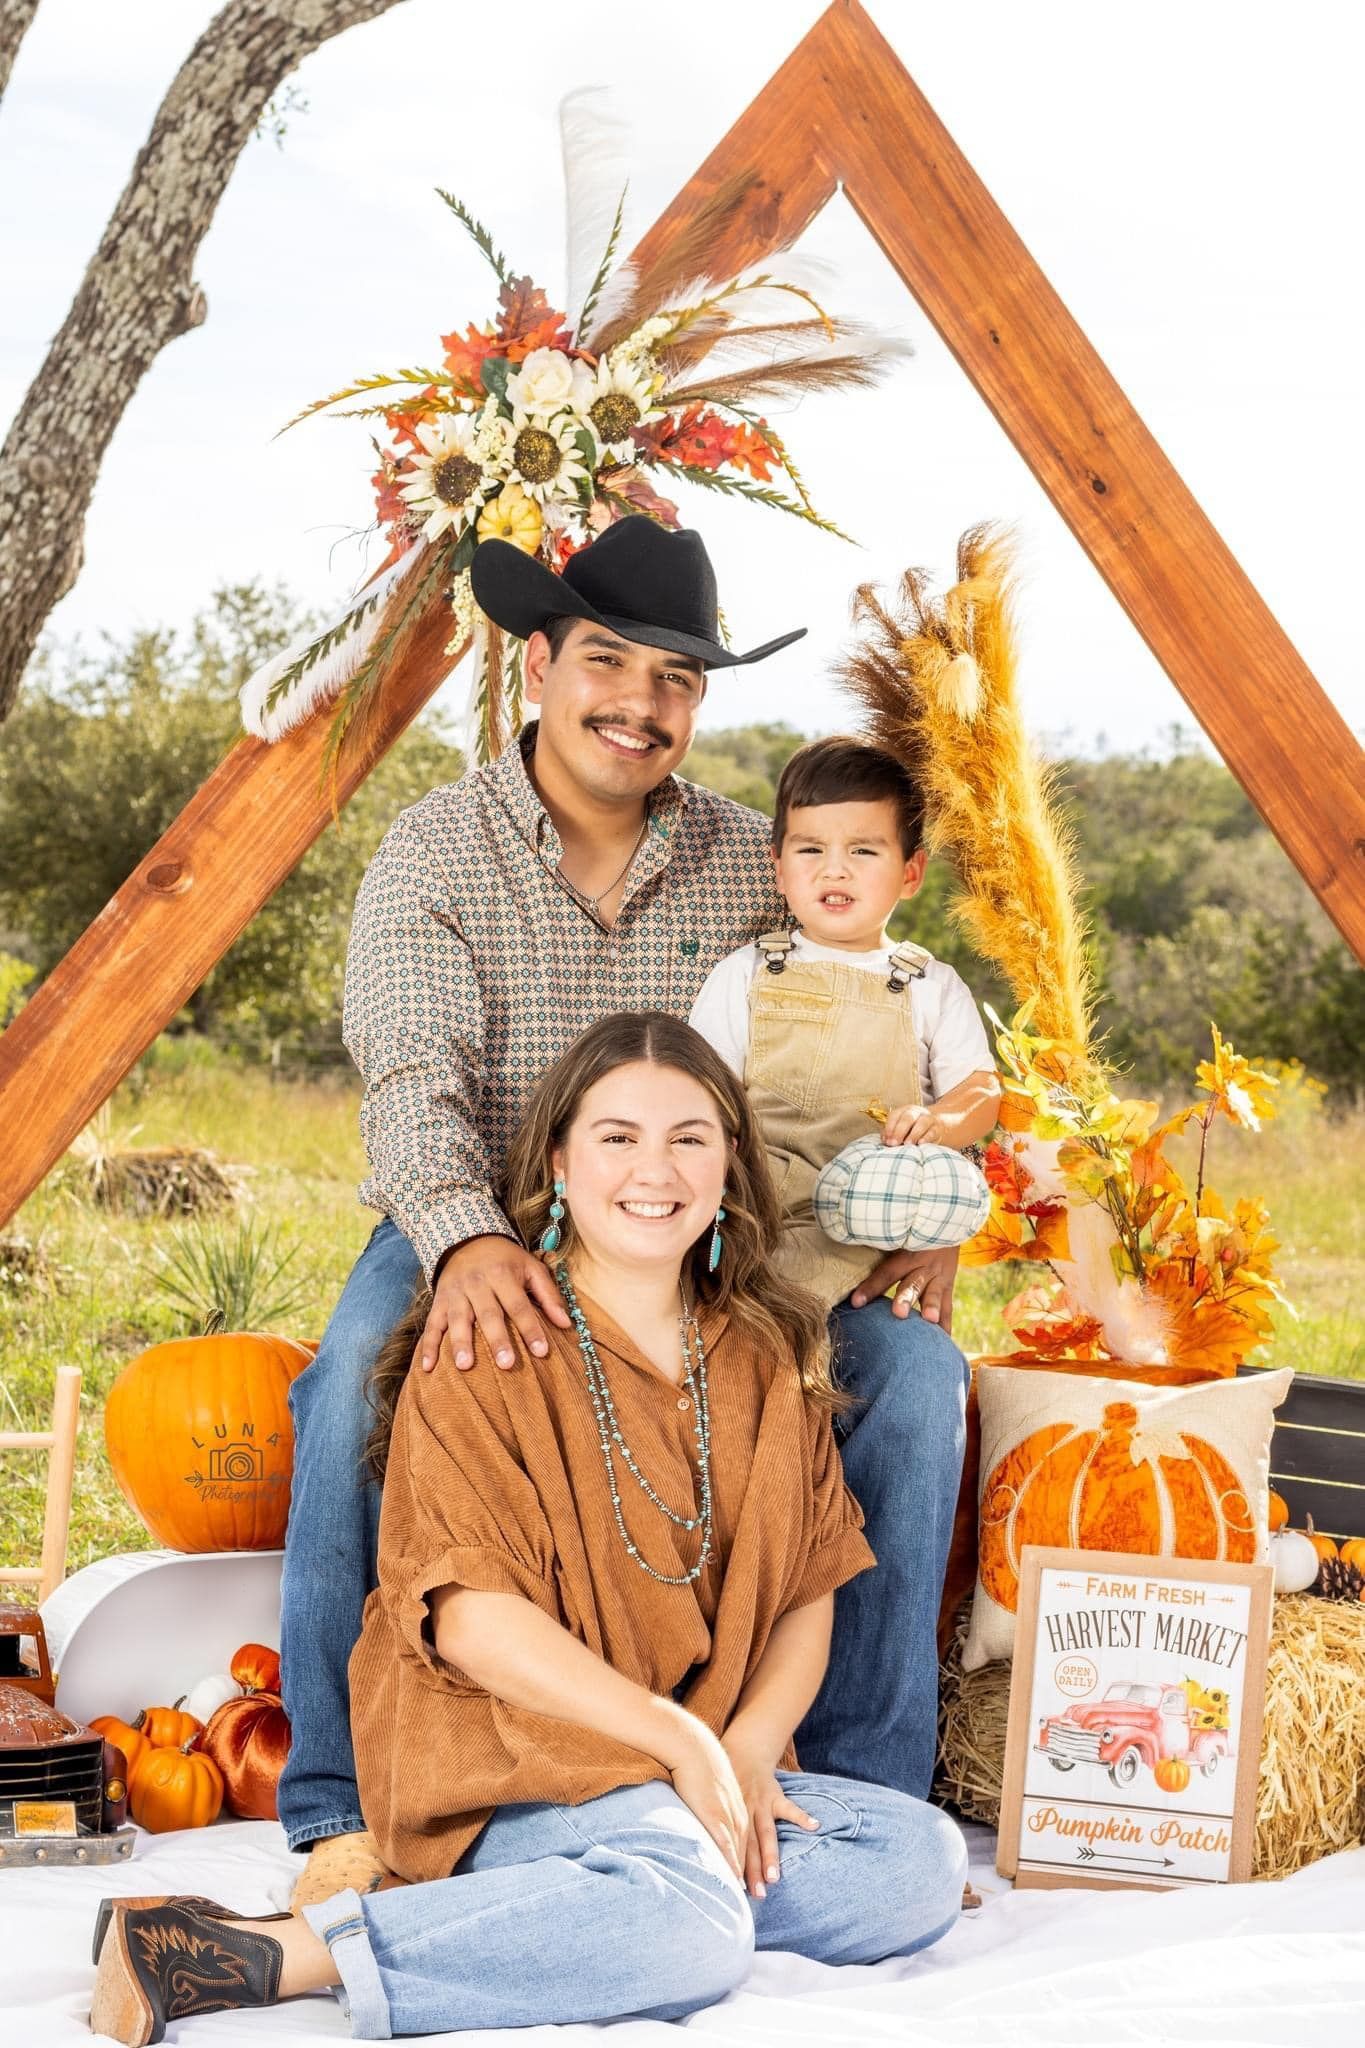 A family is posing for a picture in a field with pumpkins.